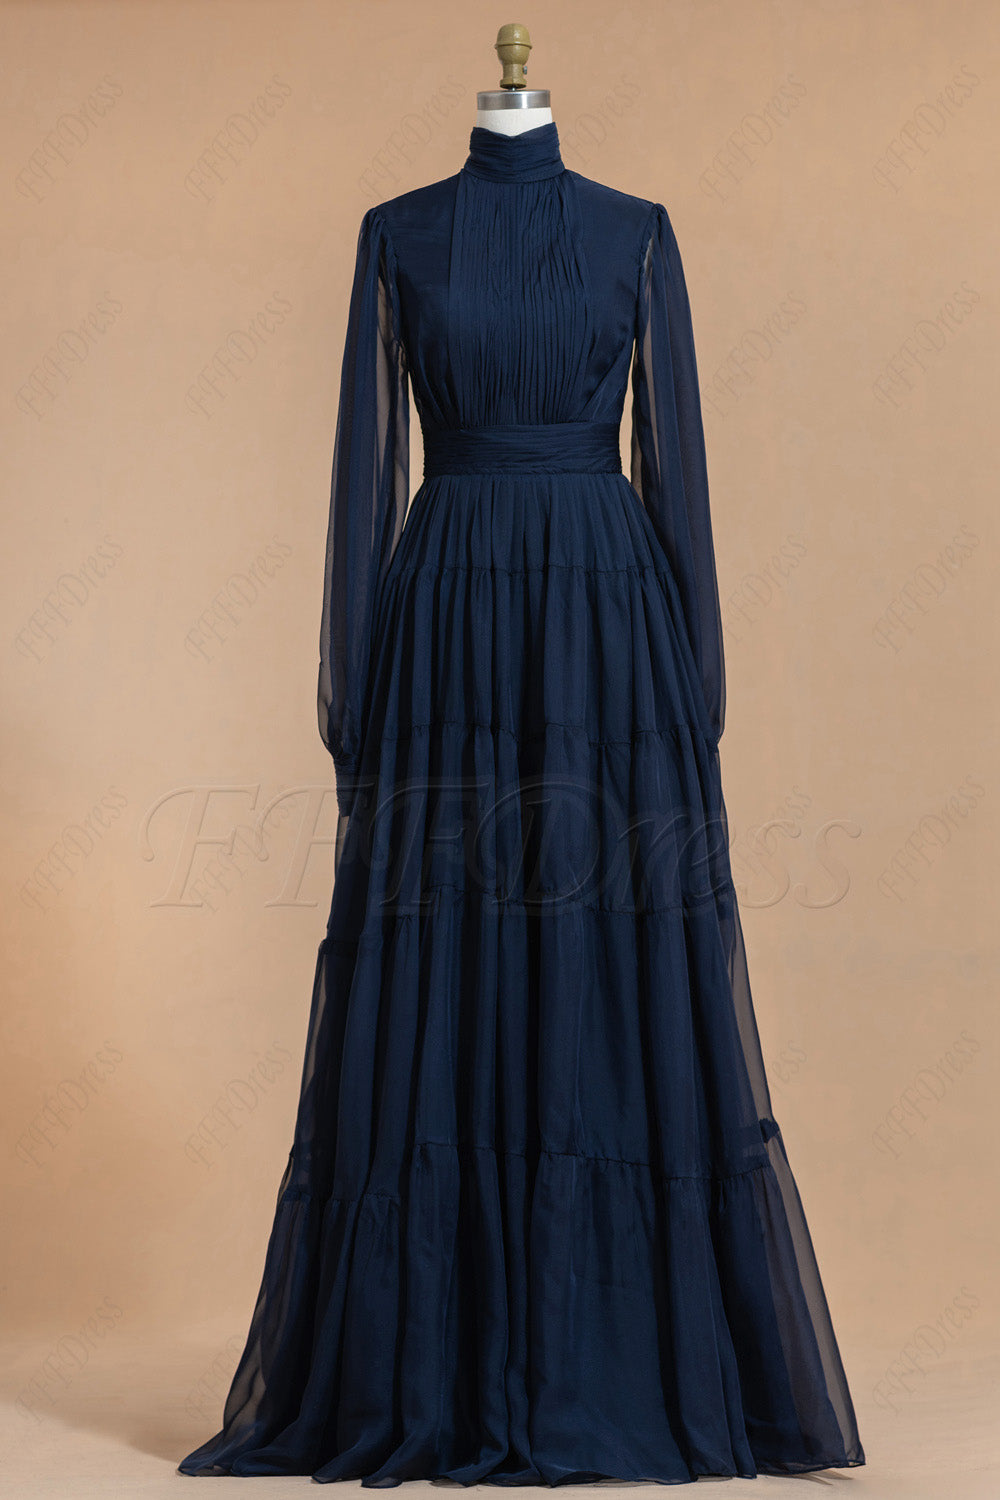 High neck modest navy blue bridesmaid dresses long sleeves with tiered skirt